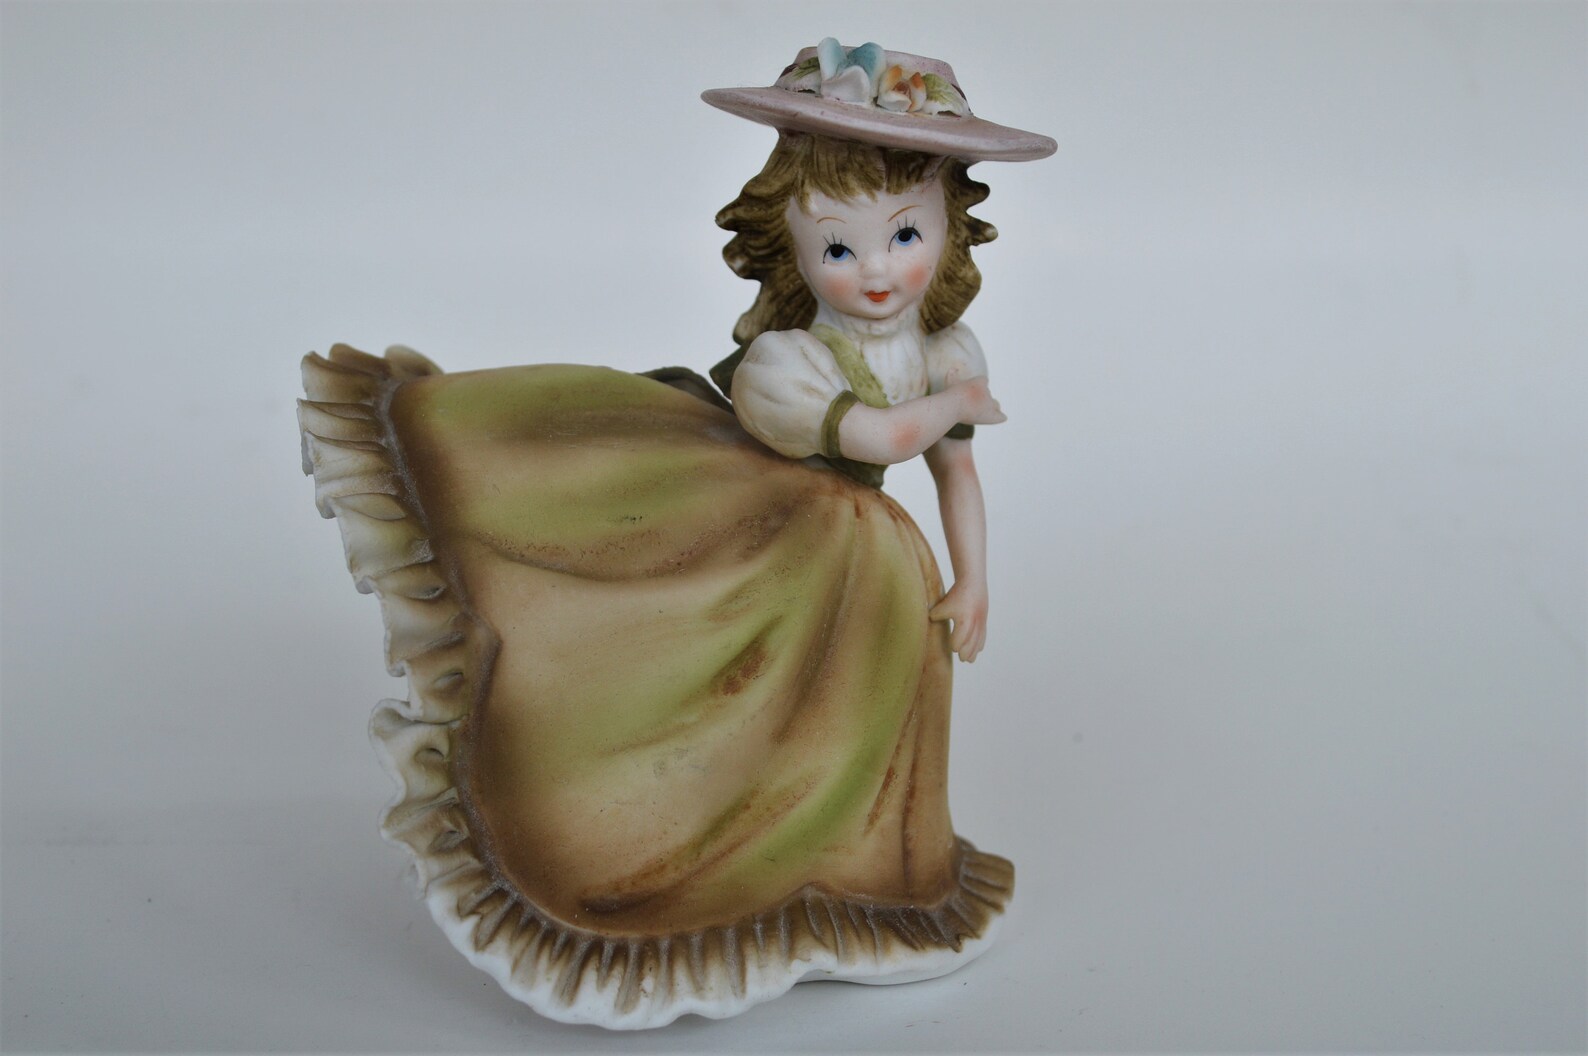 Lefton Girl With Bloomers Bisque Figurine in Green Dress - Etsy